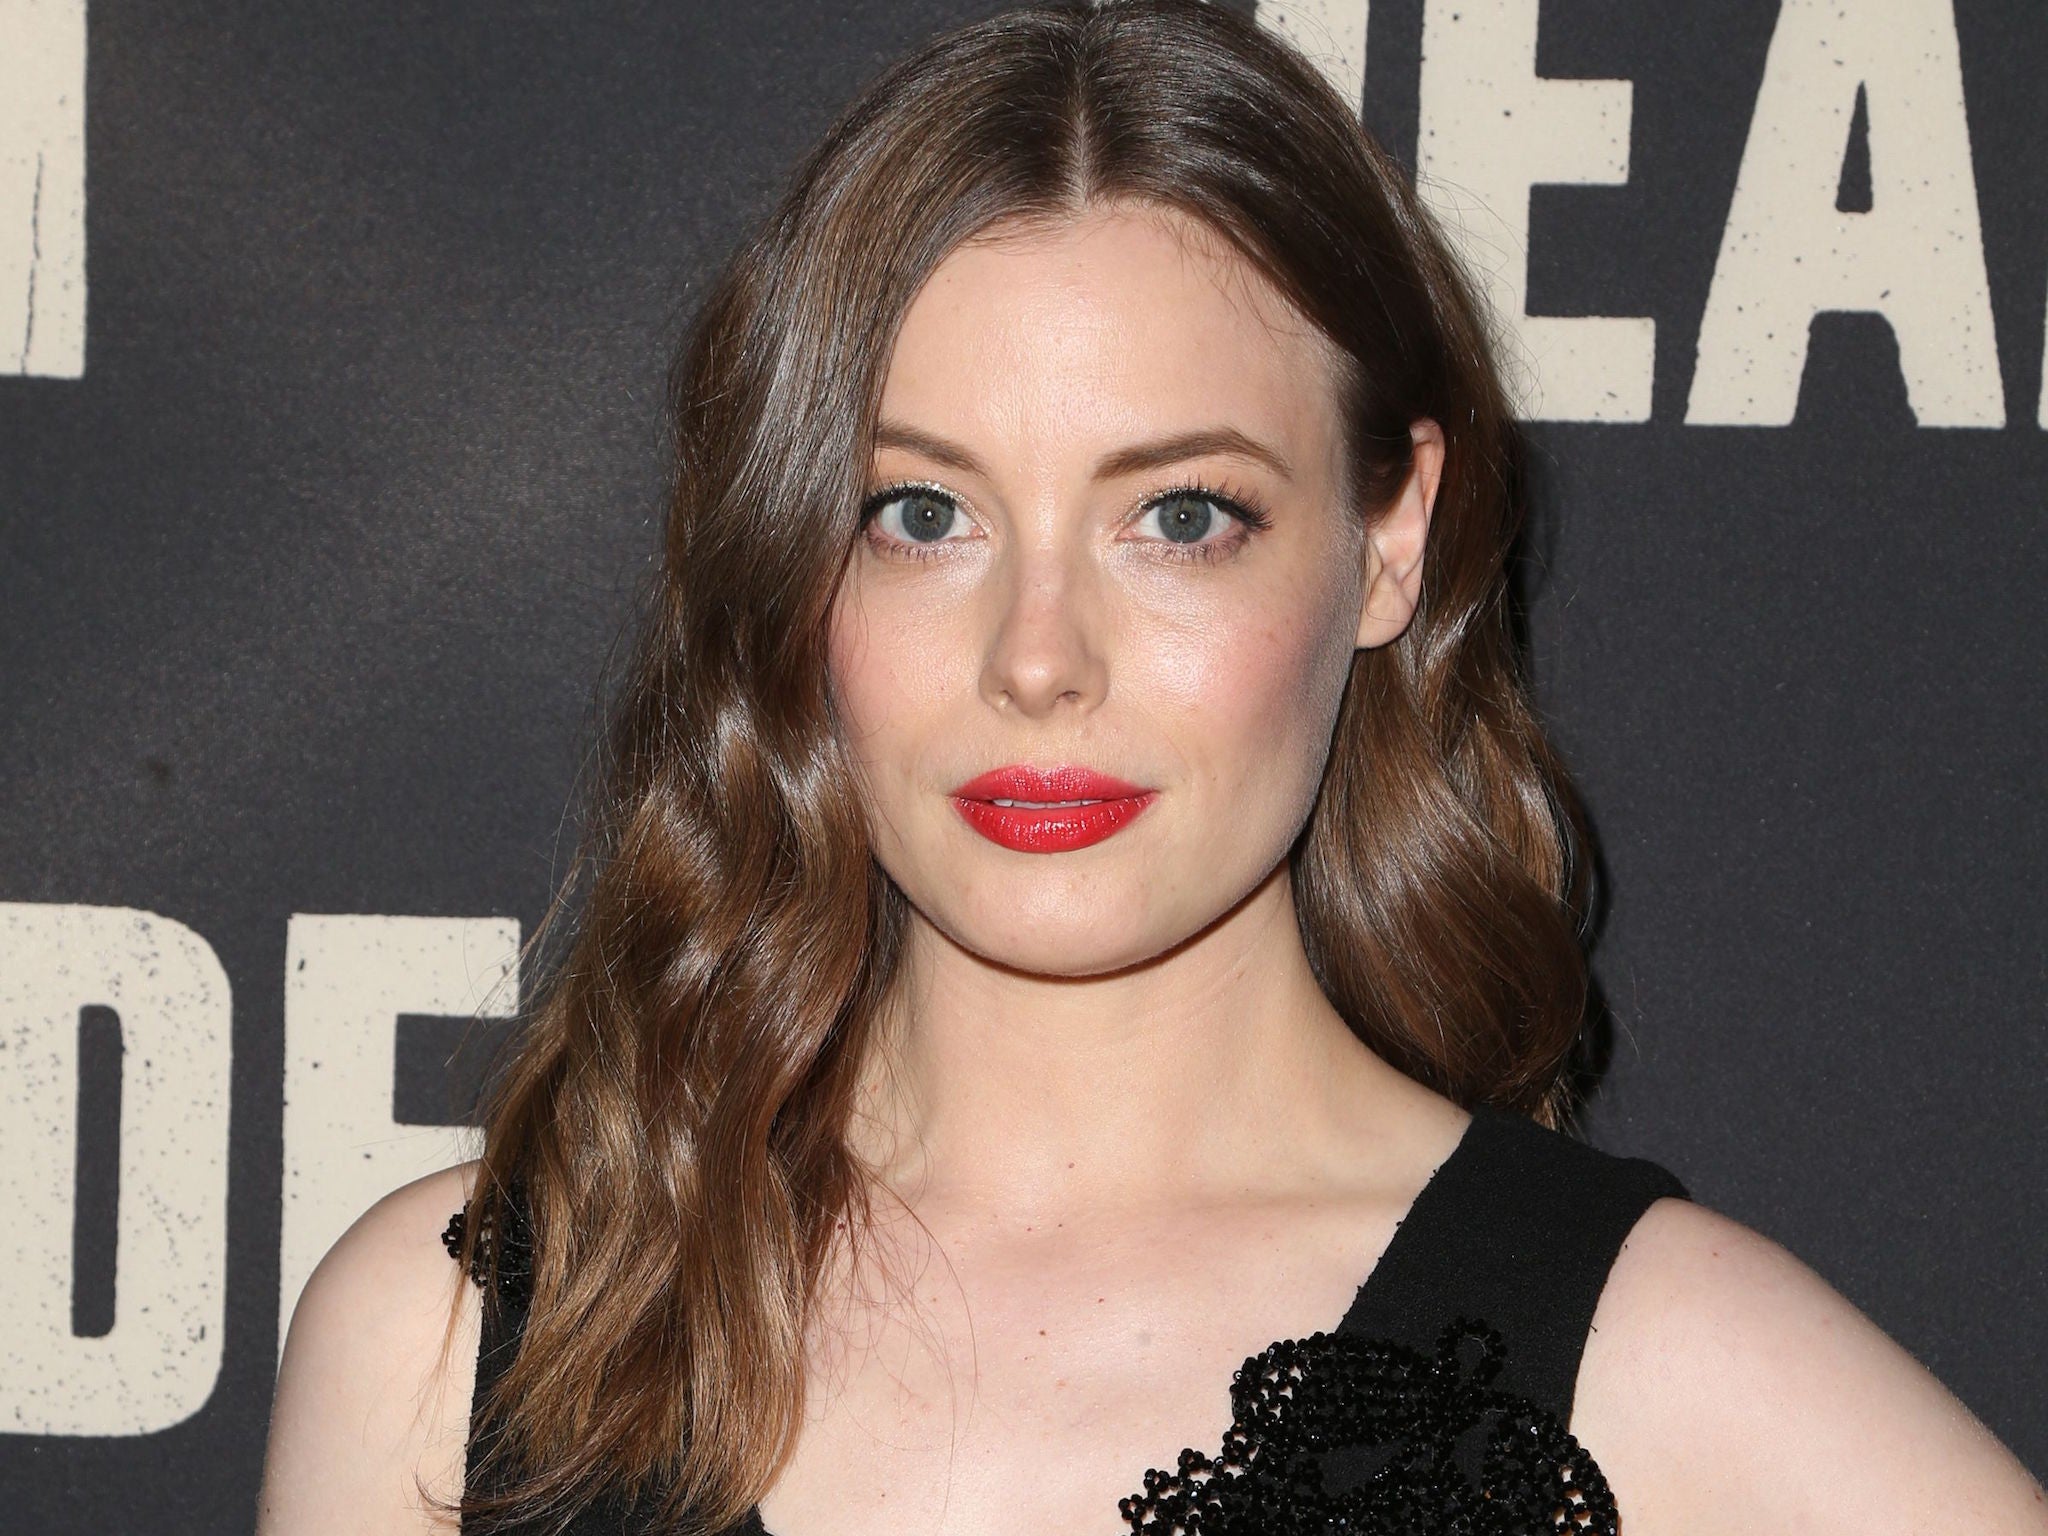 Gillian Jacobs Wiki, Bio, Age, Net Worth, and Other Facts